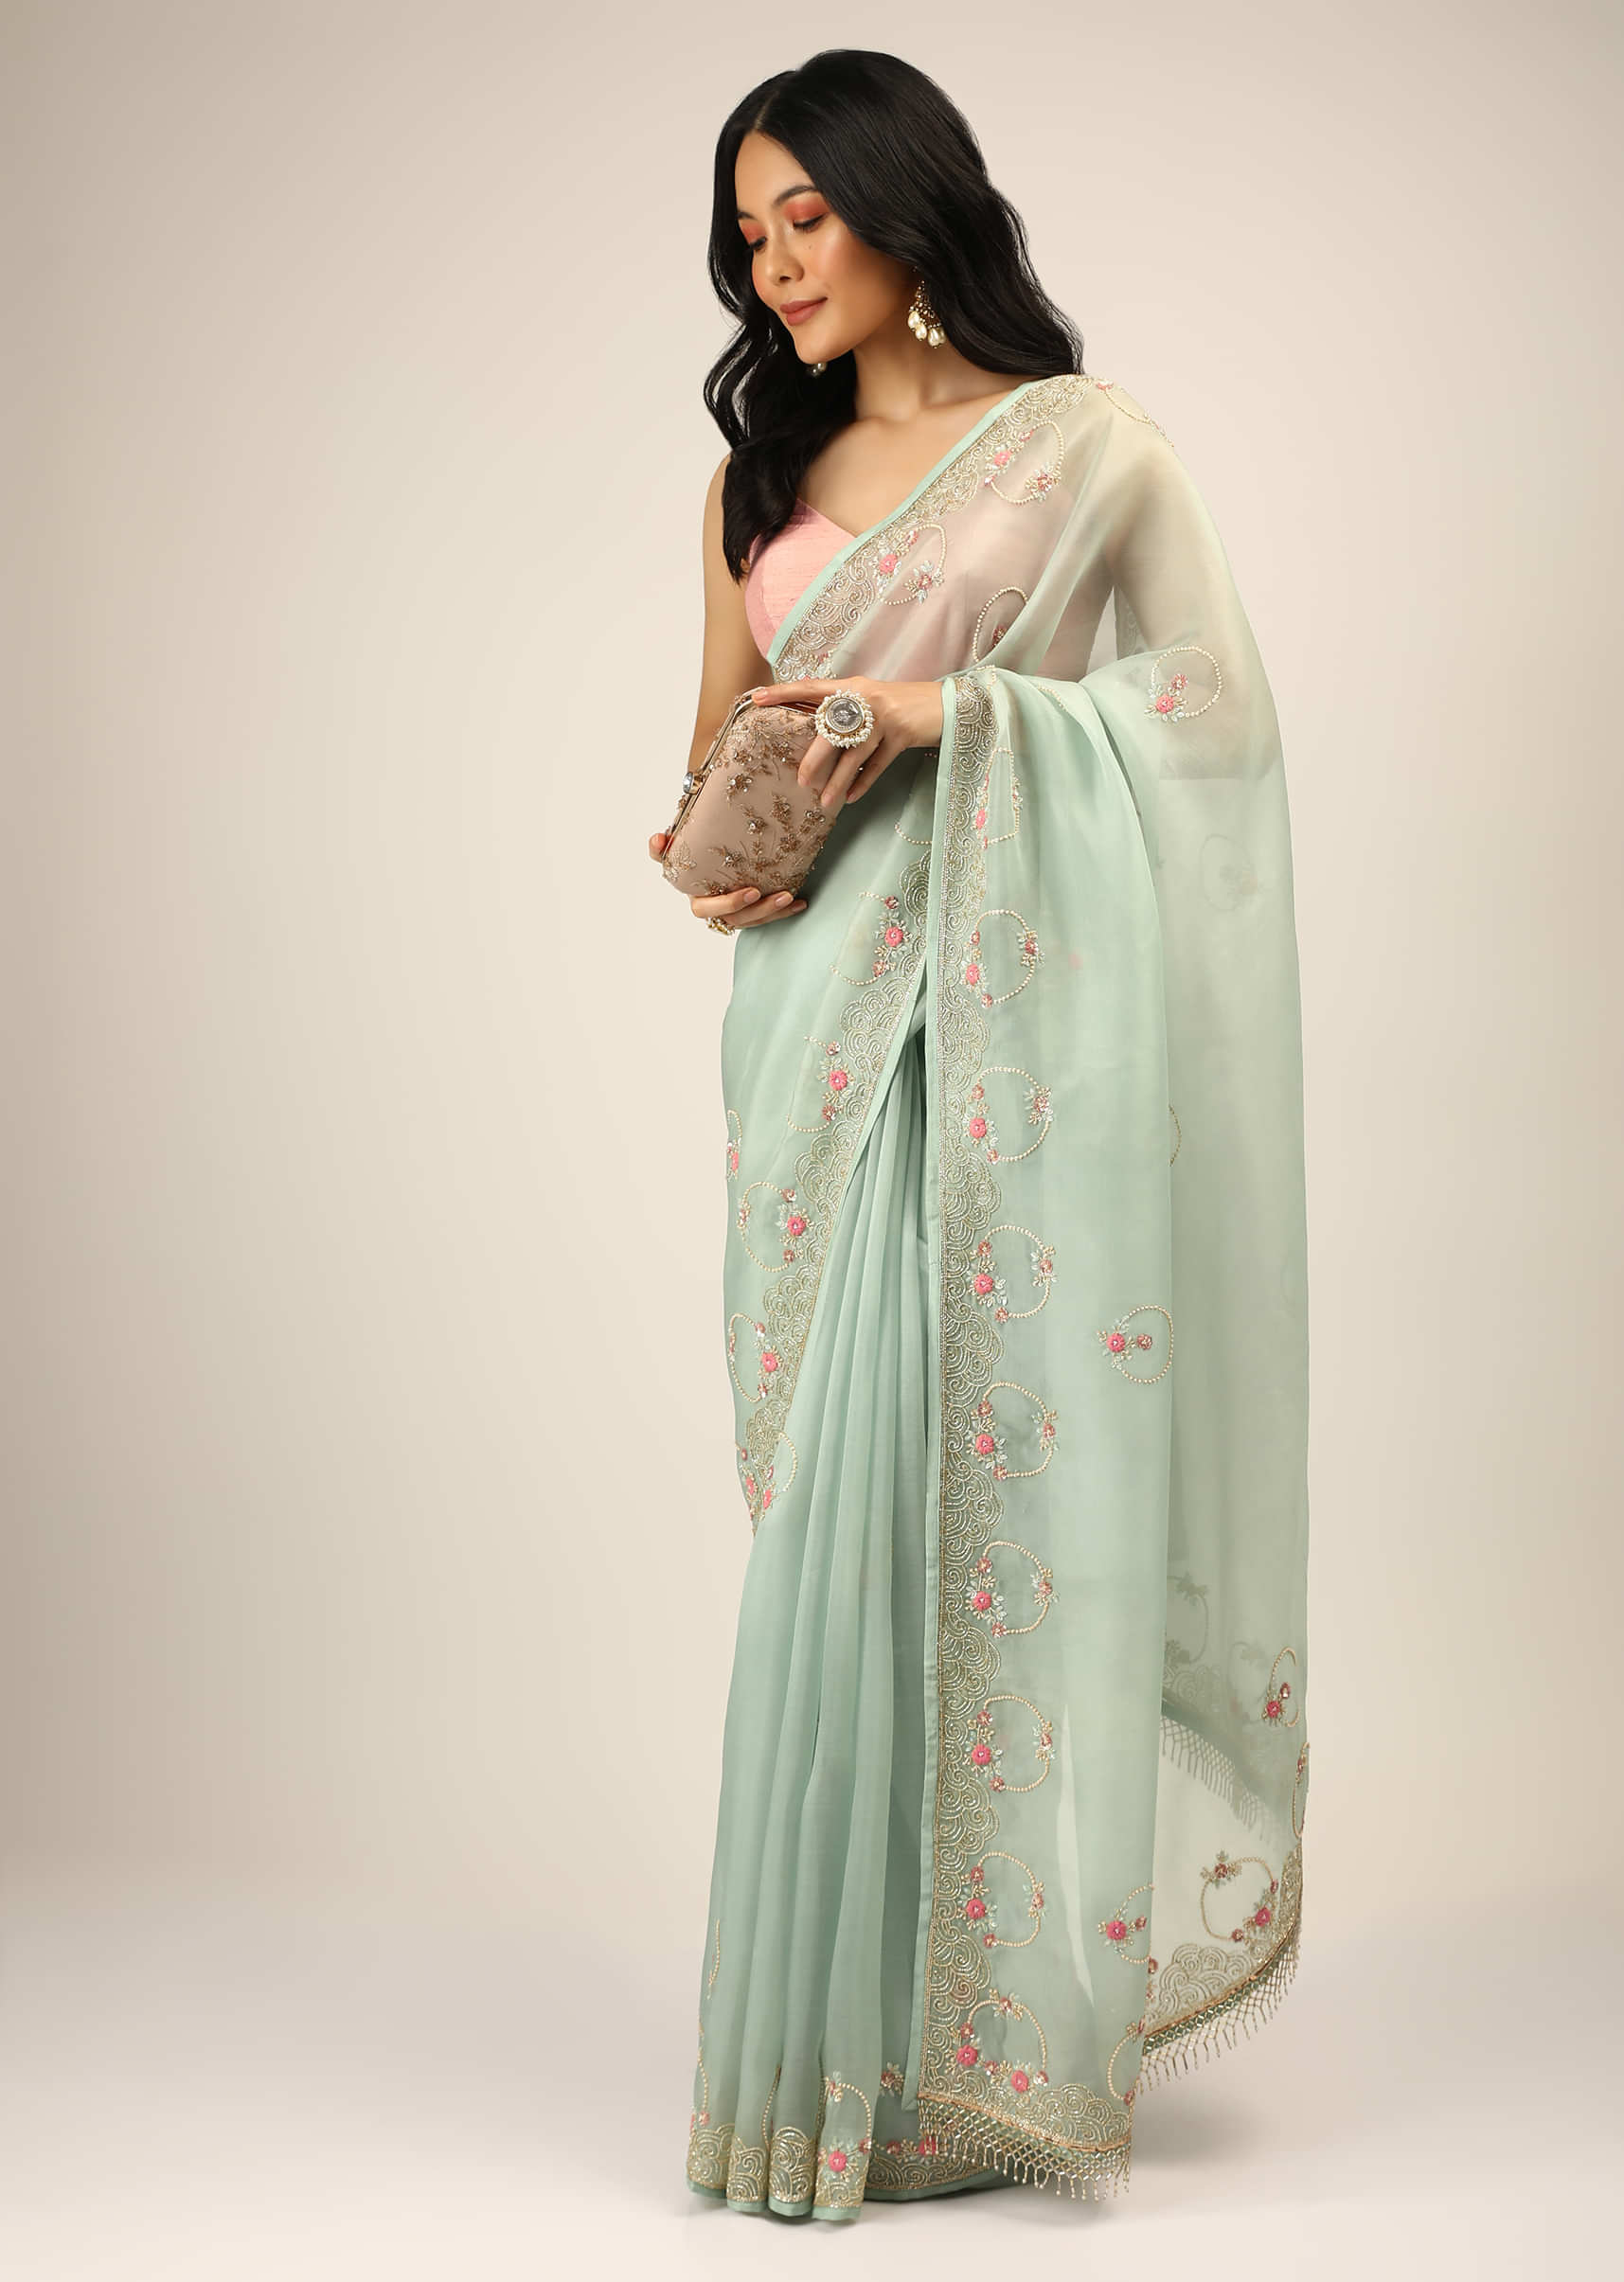 Pale Mint Saree In Organza With Multi Colored Resham And Cut Dana Embroidered Filigree And Floral Motifs On The Border And Buttis  